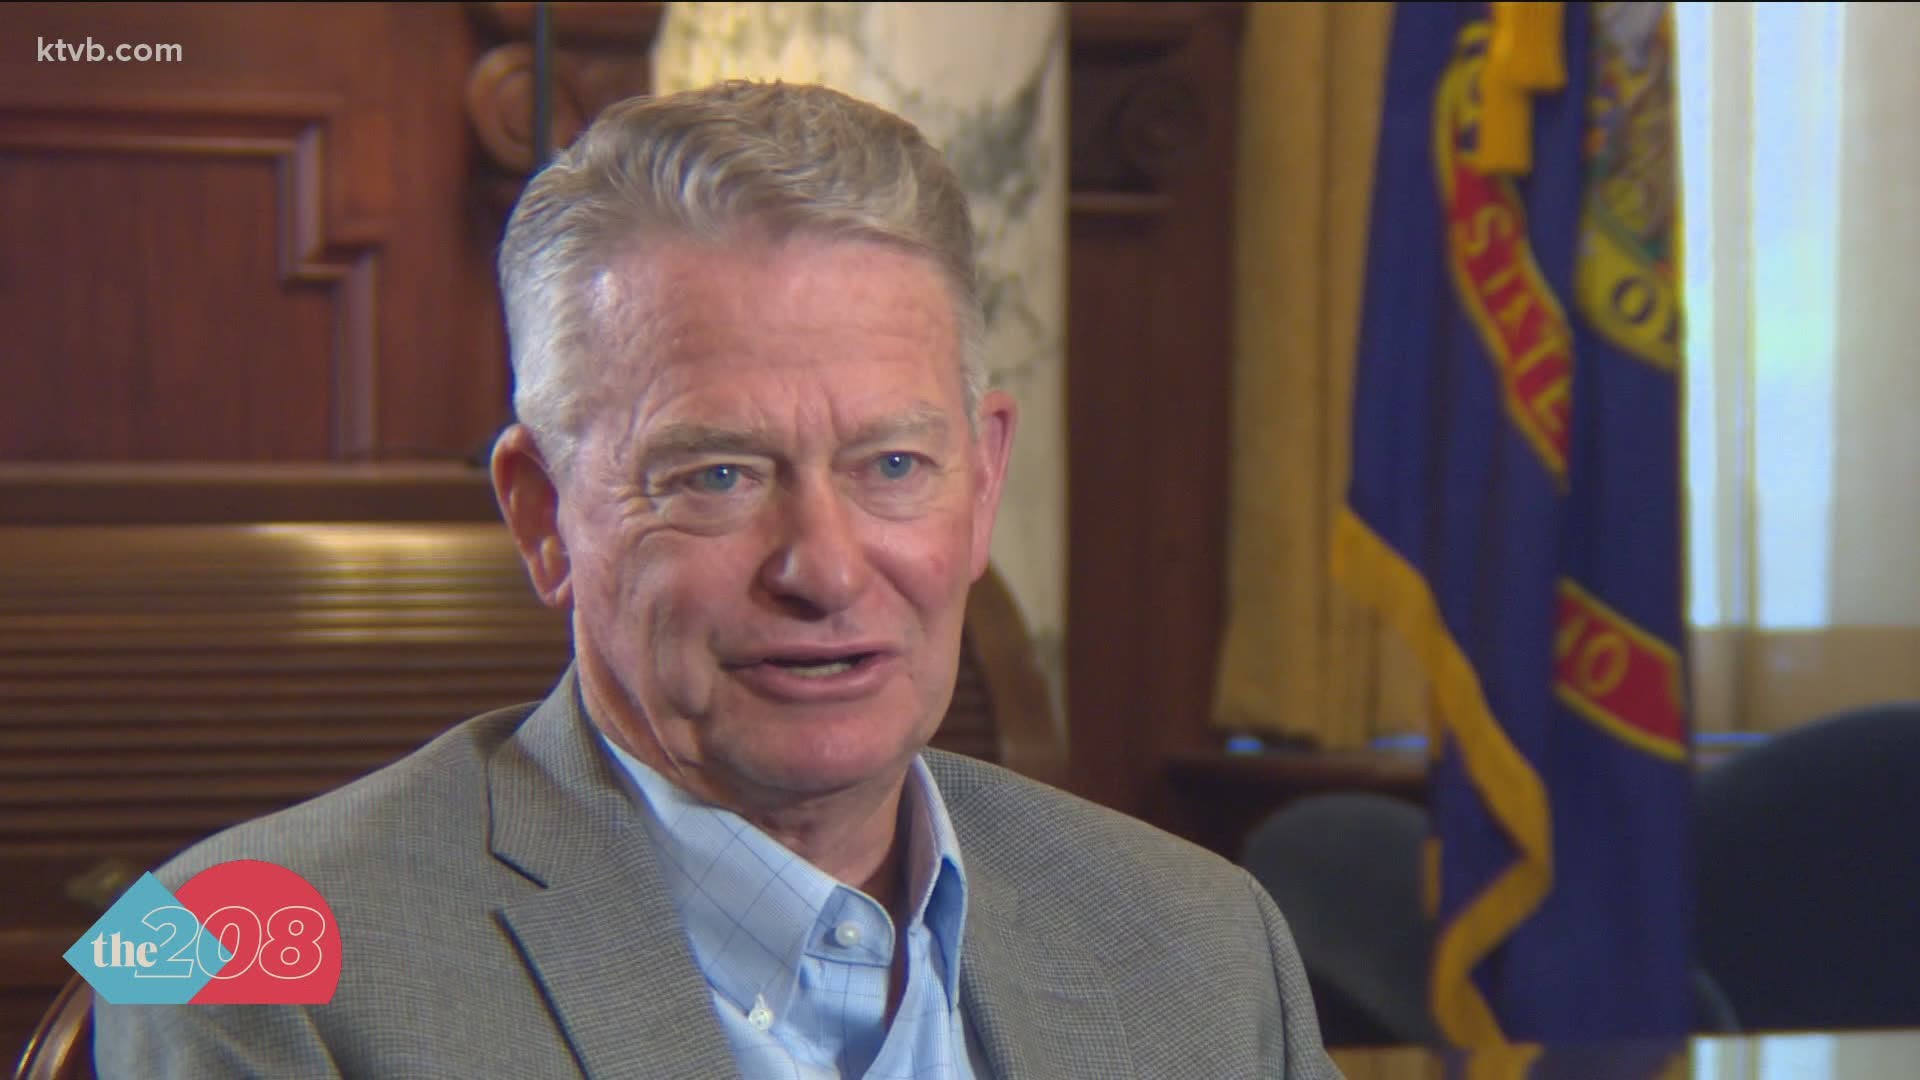 Joe Parris sat down with Gov. Little to talk about the pandemic, the lt. governor's executive order and the 2021 legislative session.